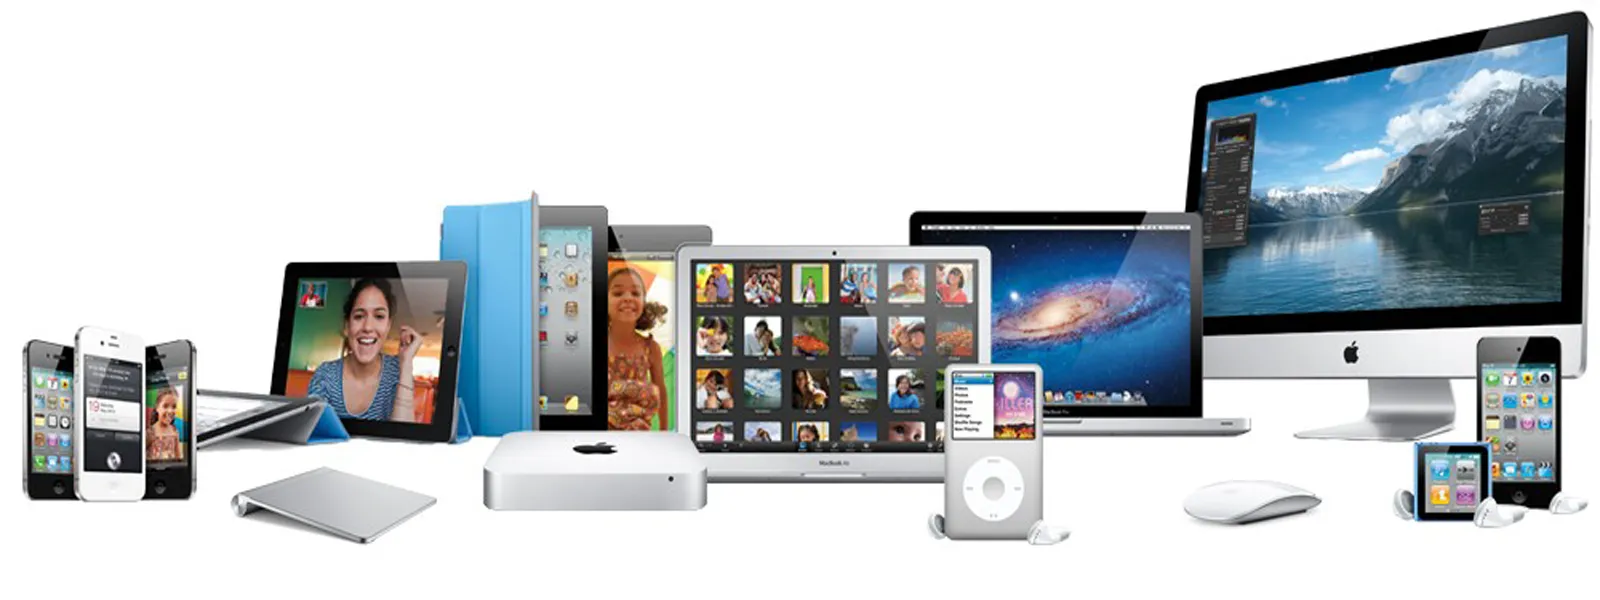 Apple Store in Jaipur For iPhone, iPod, iMac, Macbook Pro, Macbook Air, Apple TV, iphone store in jaipur, apple showroom in jaipur, apple store jaipur, istore jaipur, apple iphone service center in jaipur